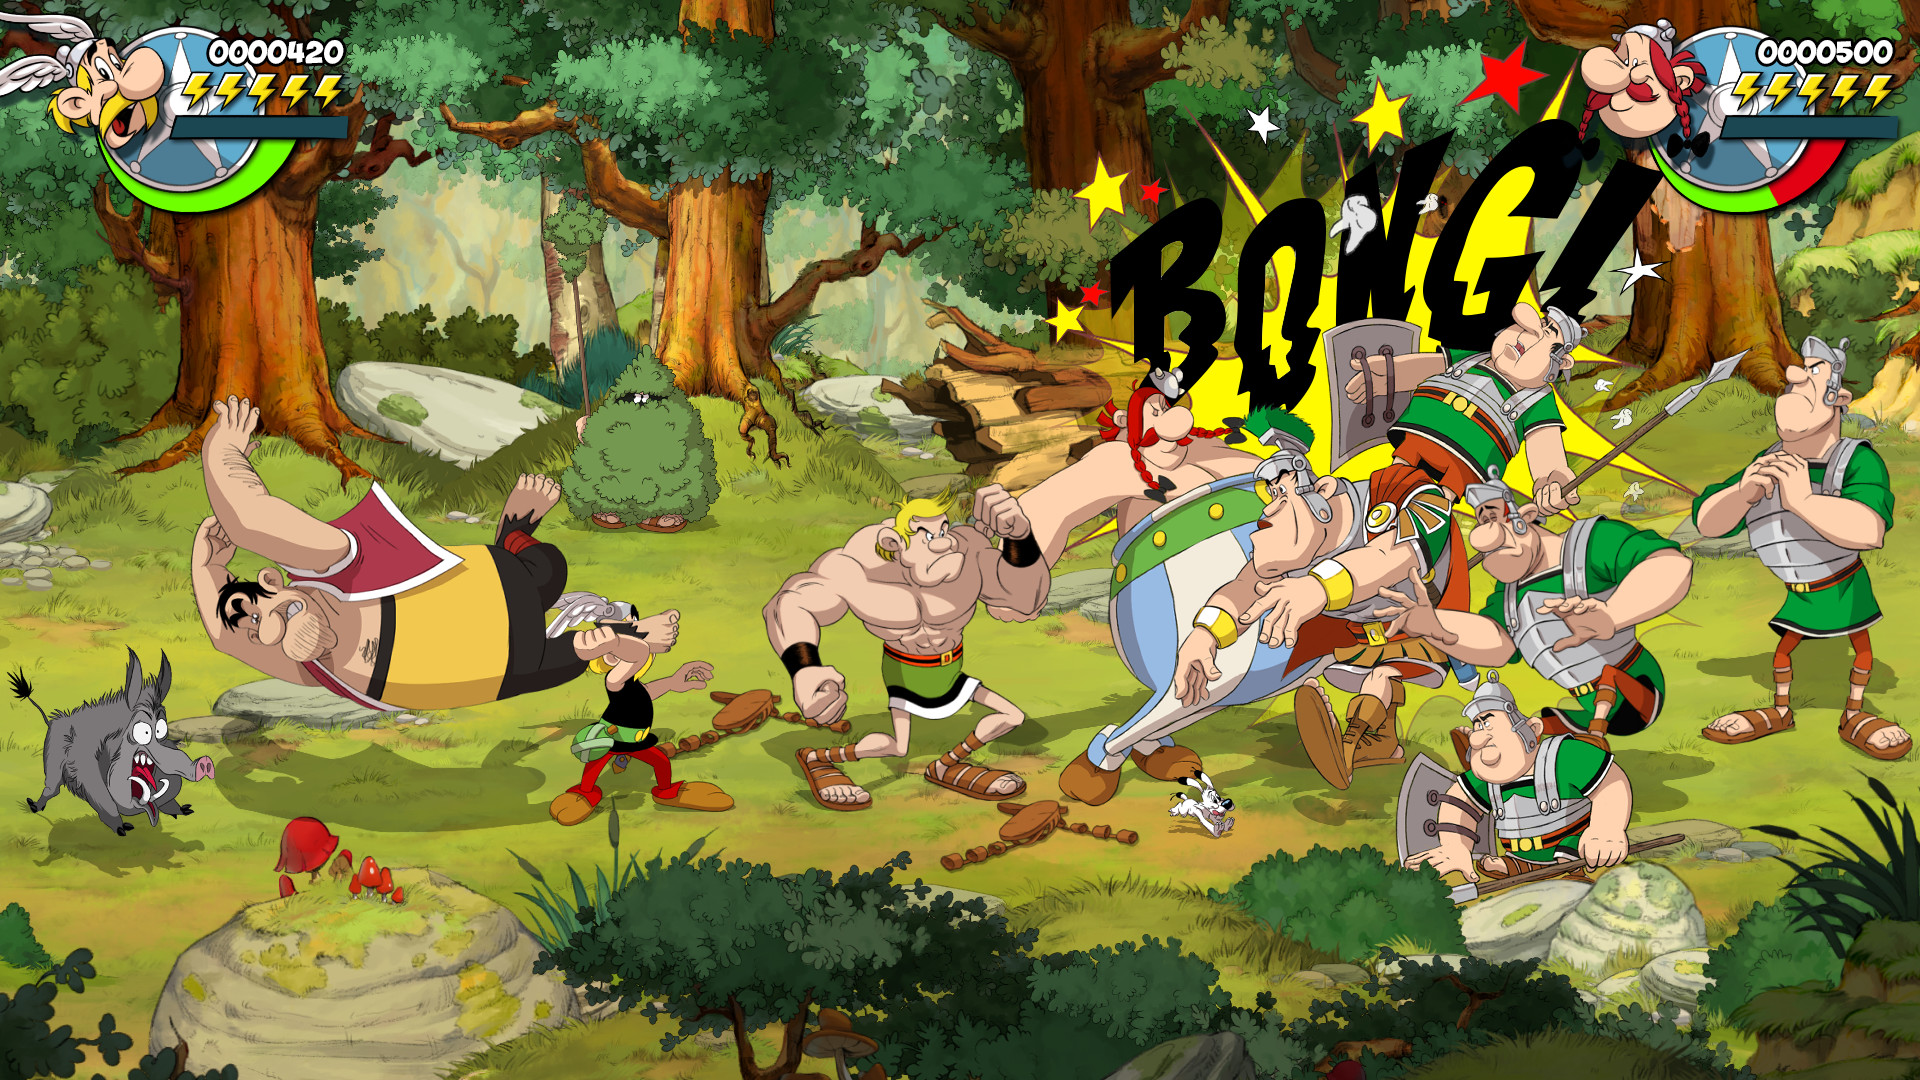 Find the best laptops for Asterix & Obelix: Slap them All!